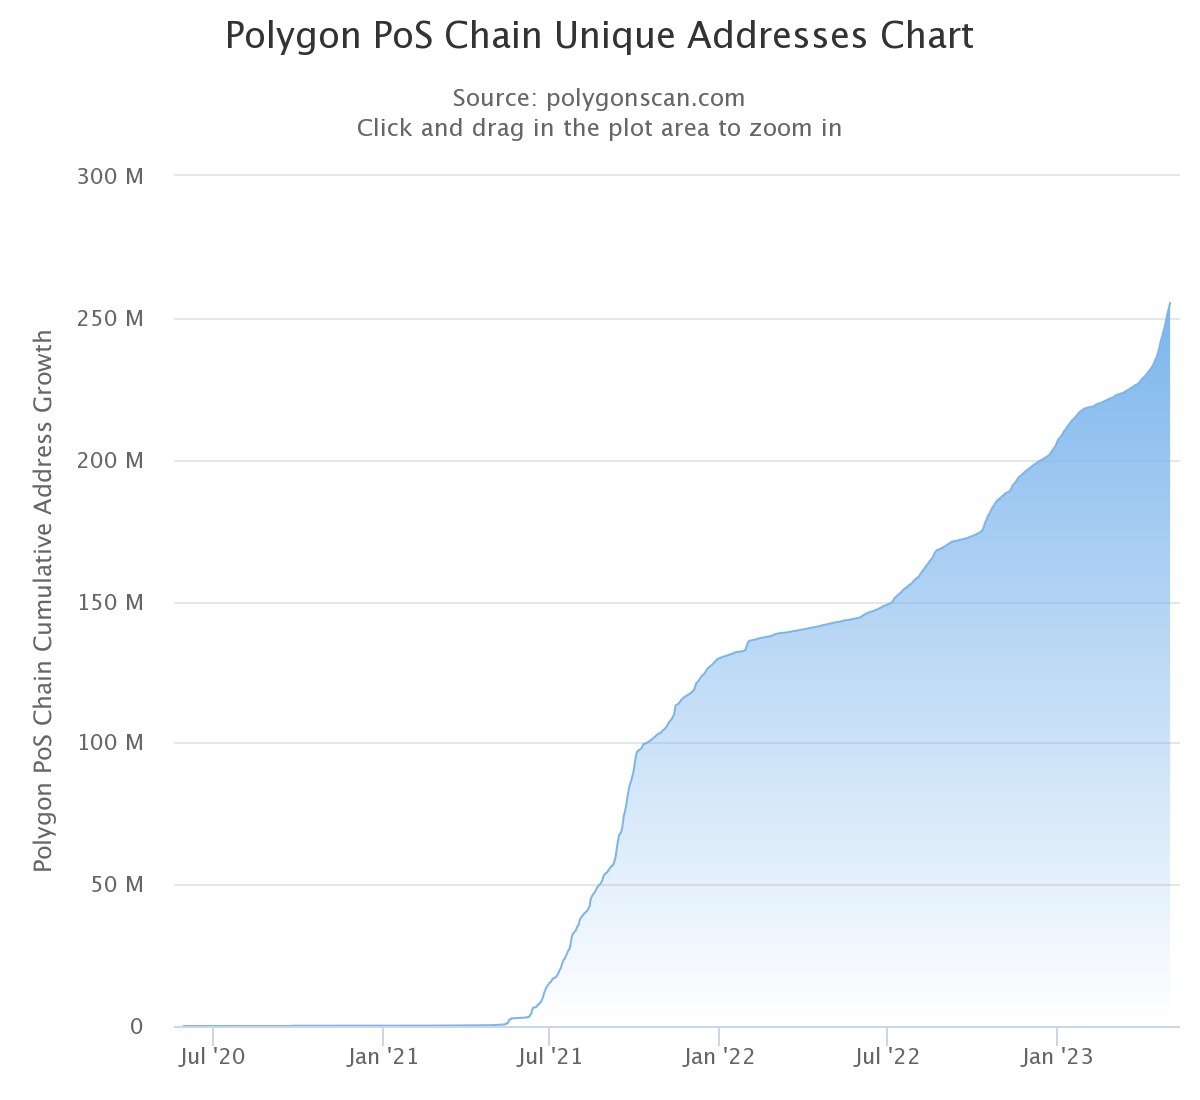 Figure 1 - Number of unique addresses on Polygon